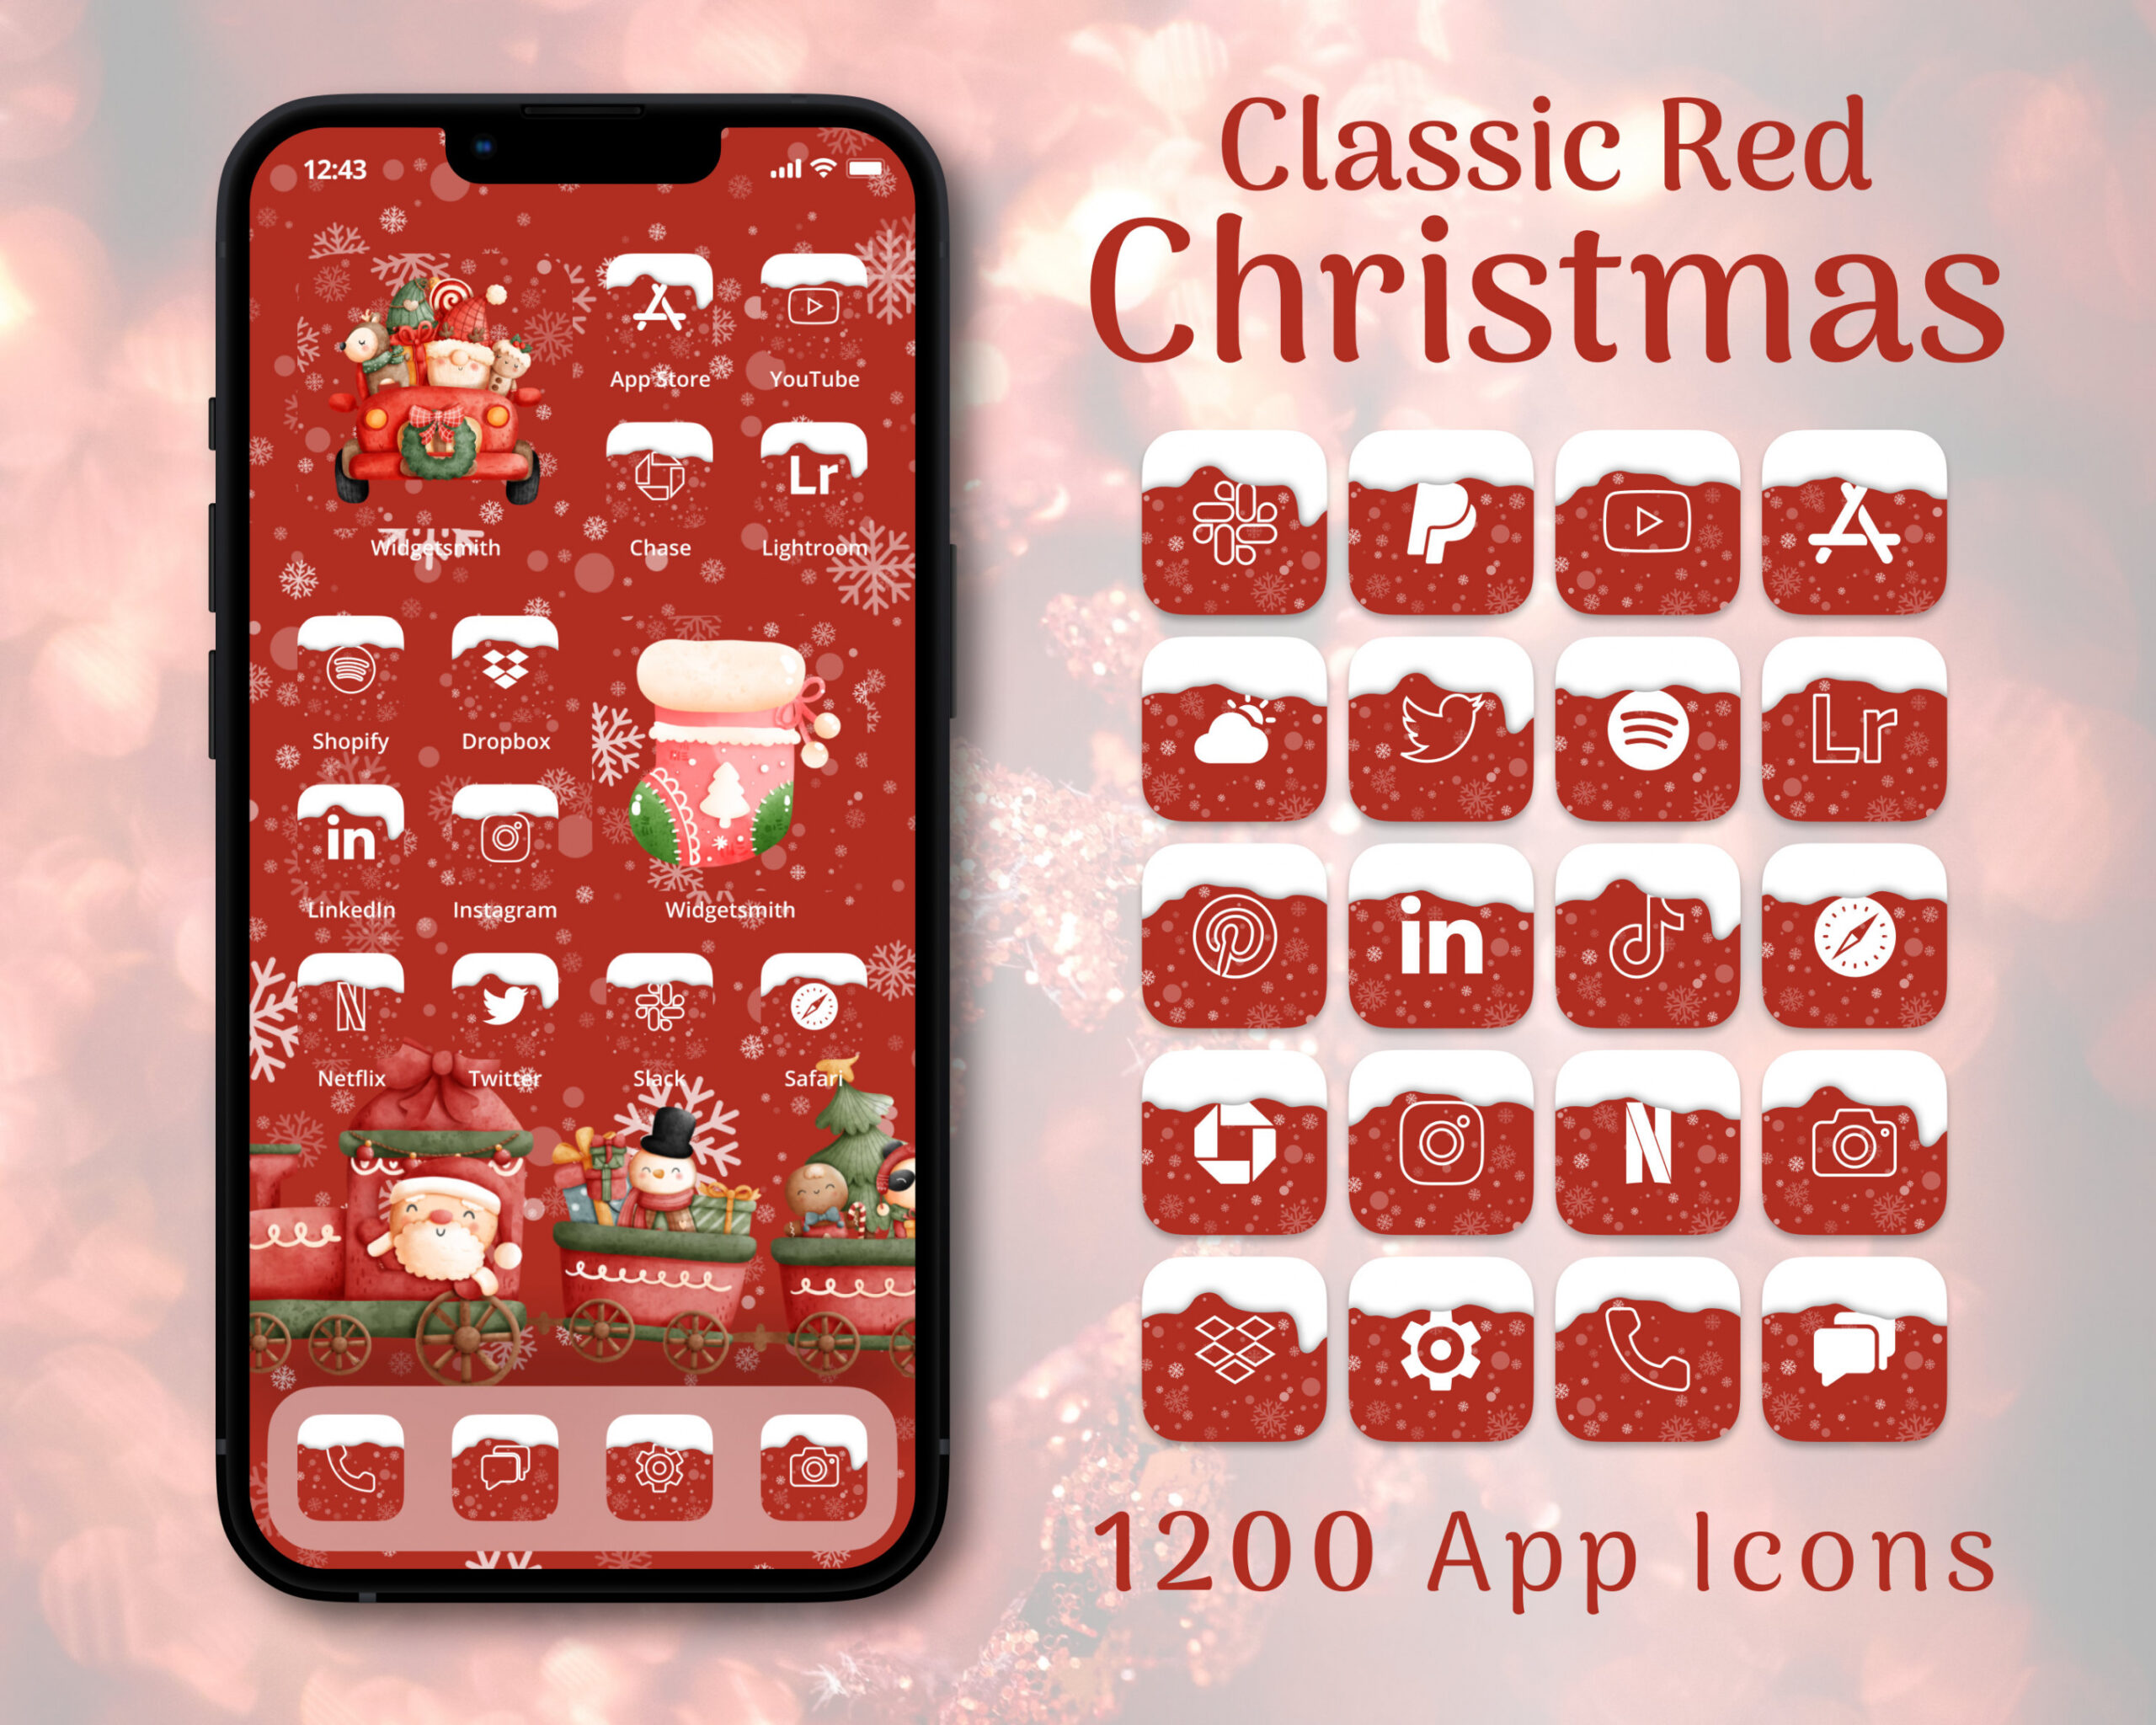 Red Christmas App Icons Christmas Themed iPhone Home Screen